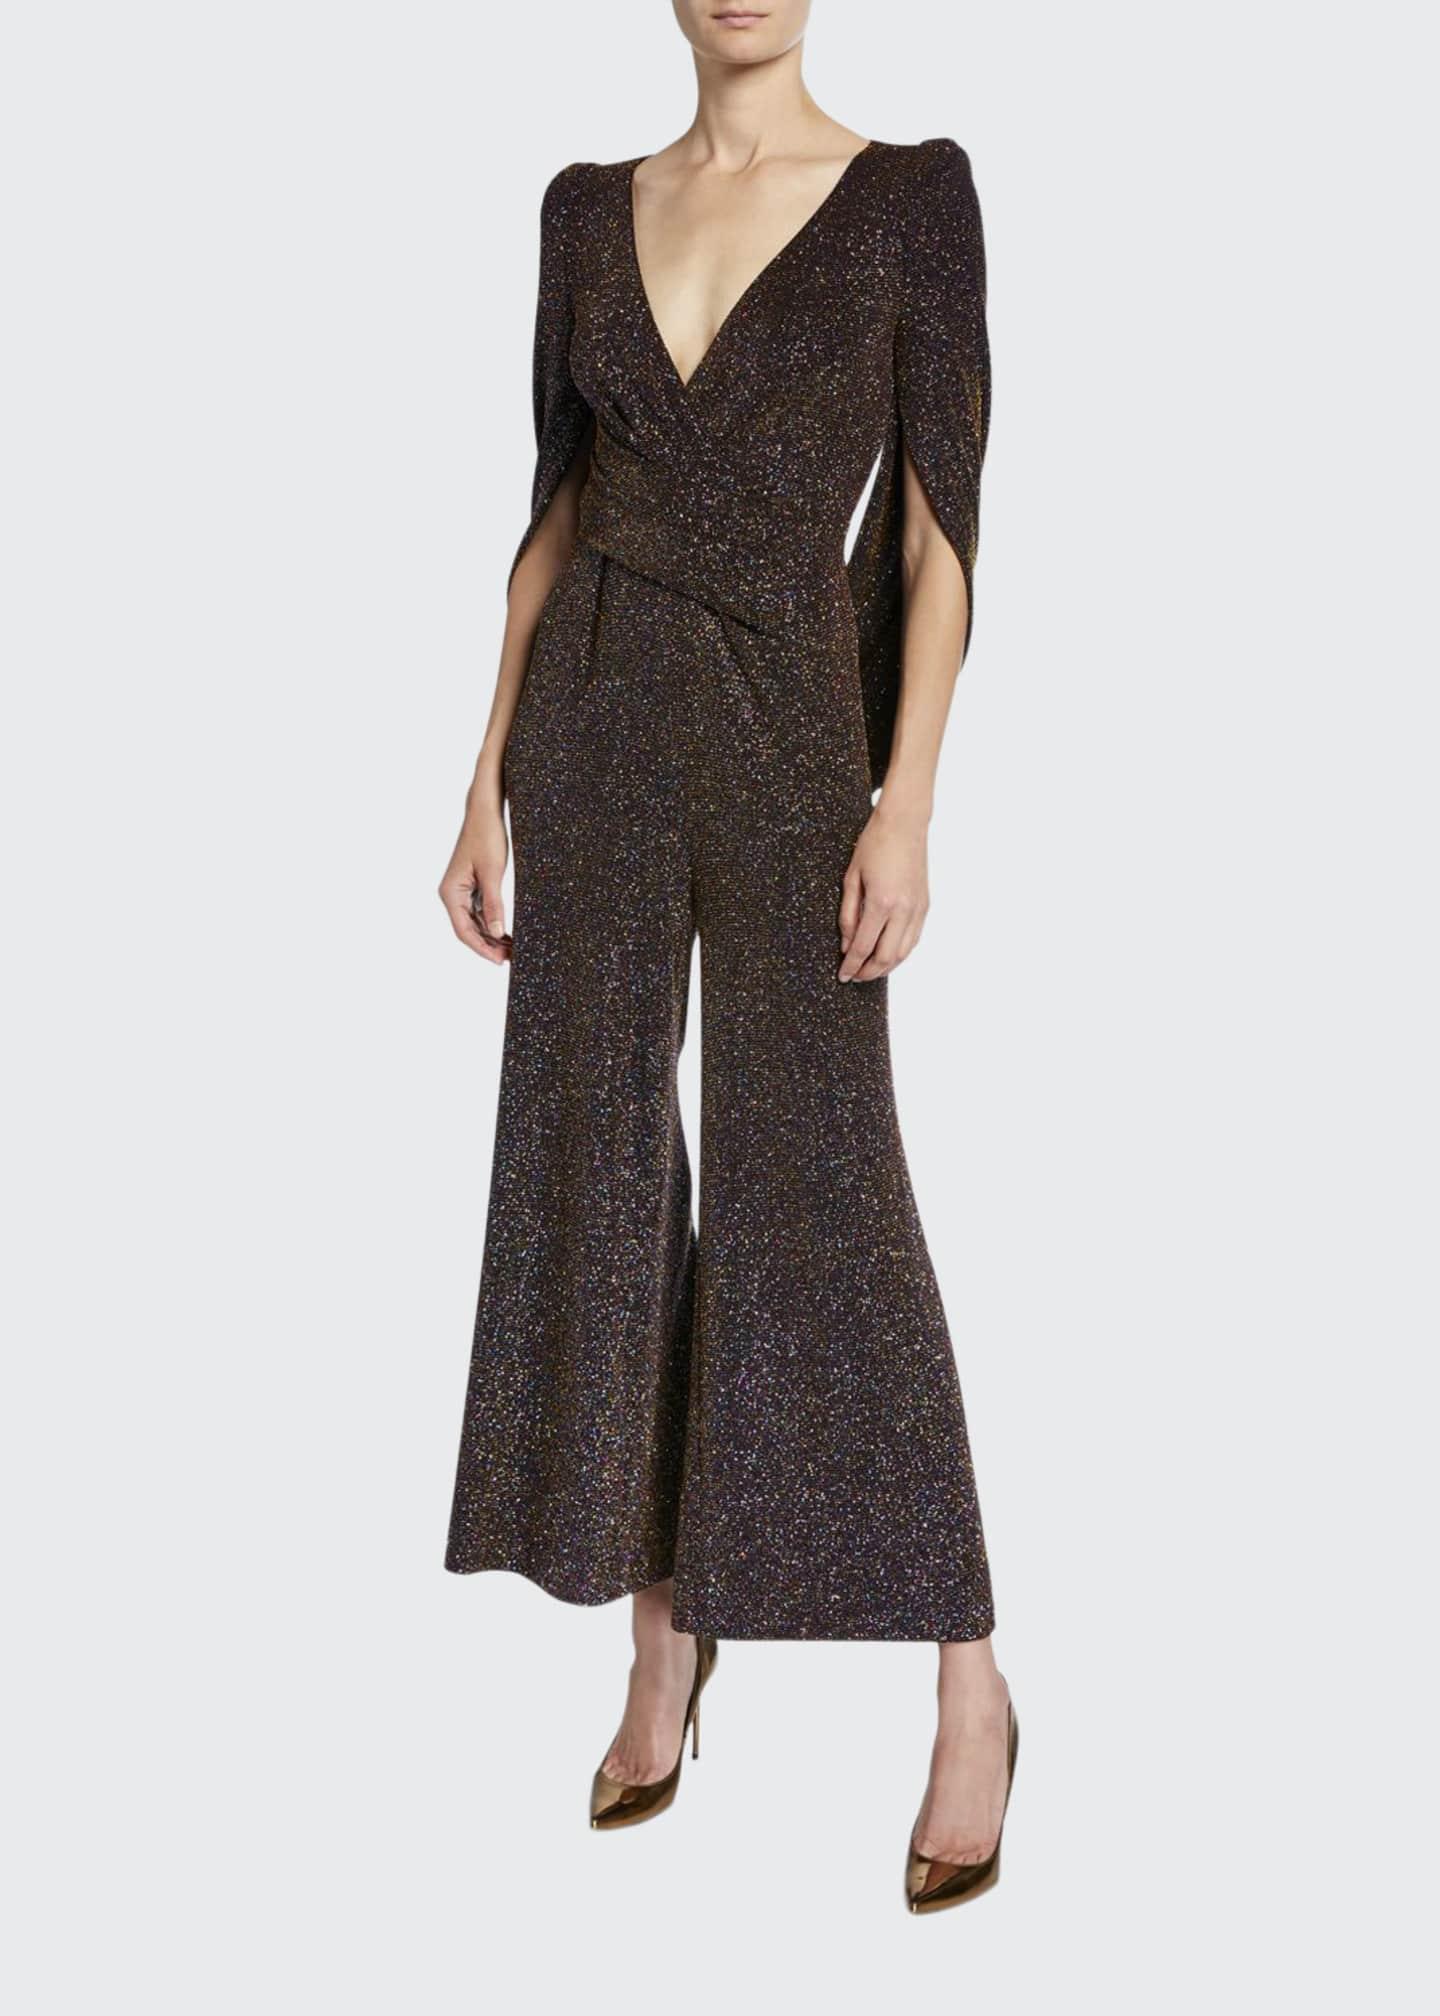 Talbot Runhof Synthetic Stardust Jersey Jumpsuit in Black - Save 60% - Lyst